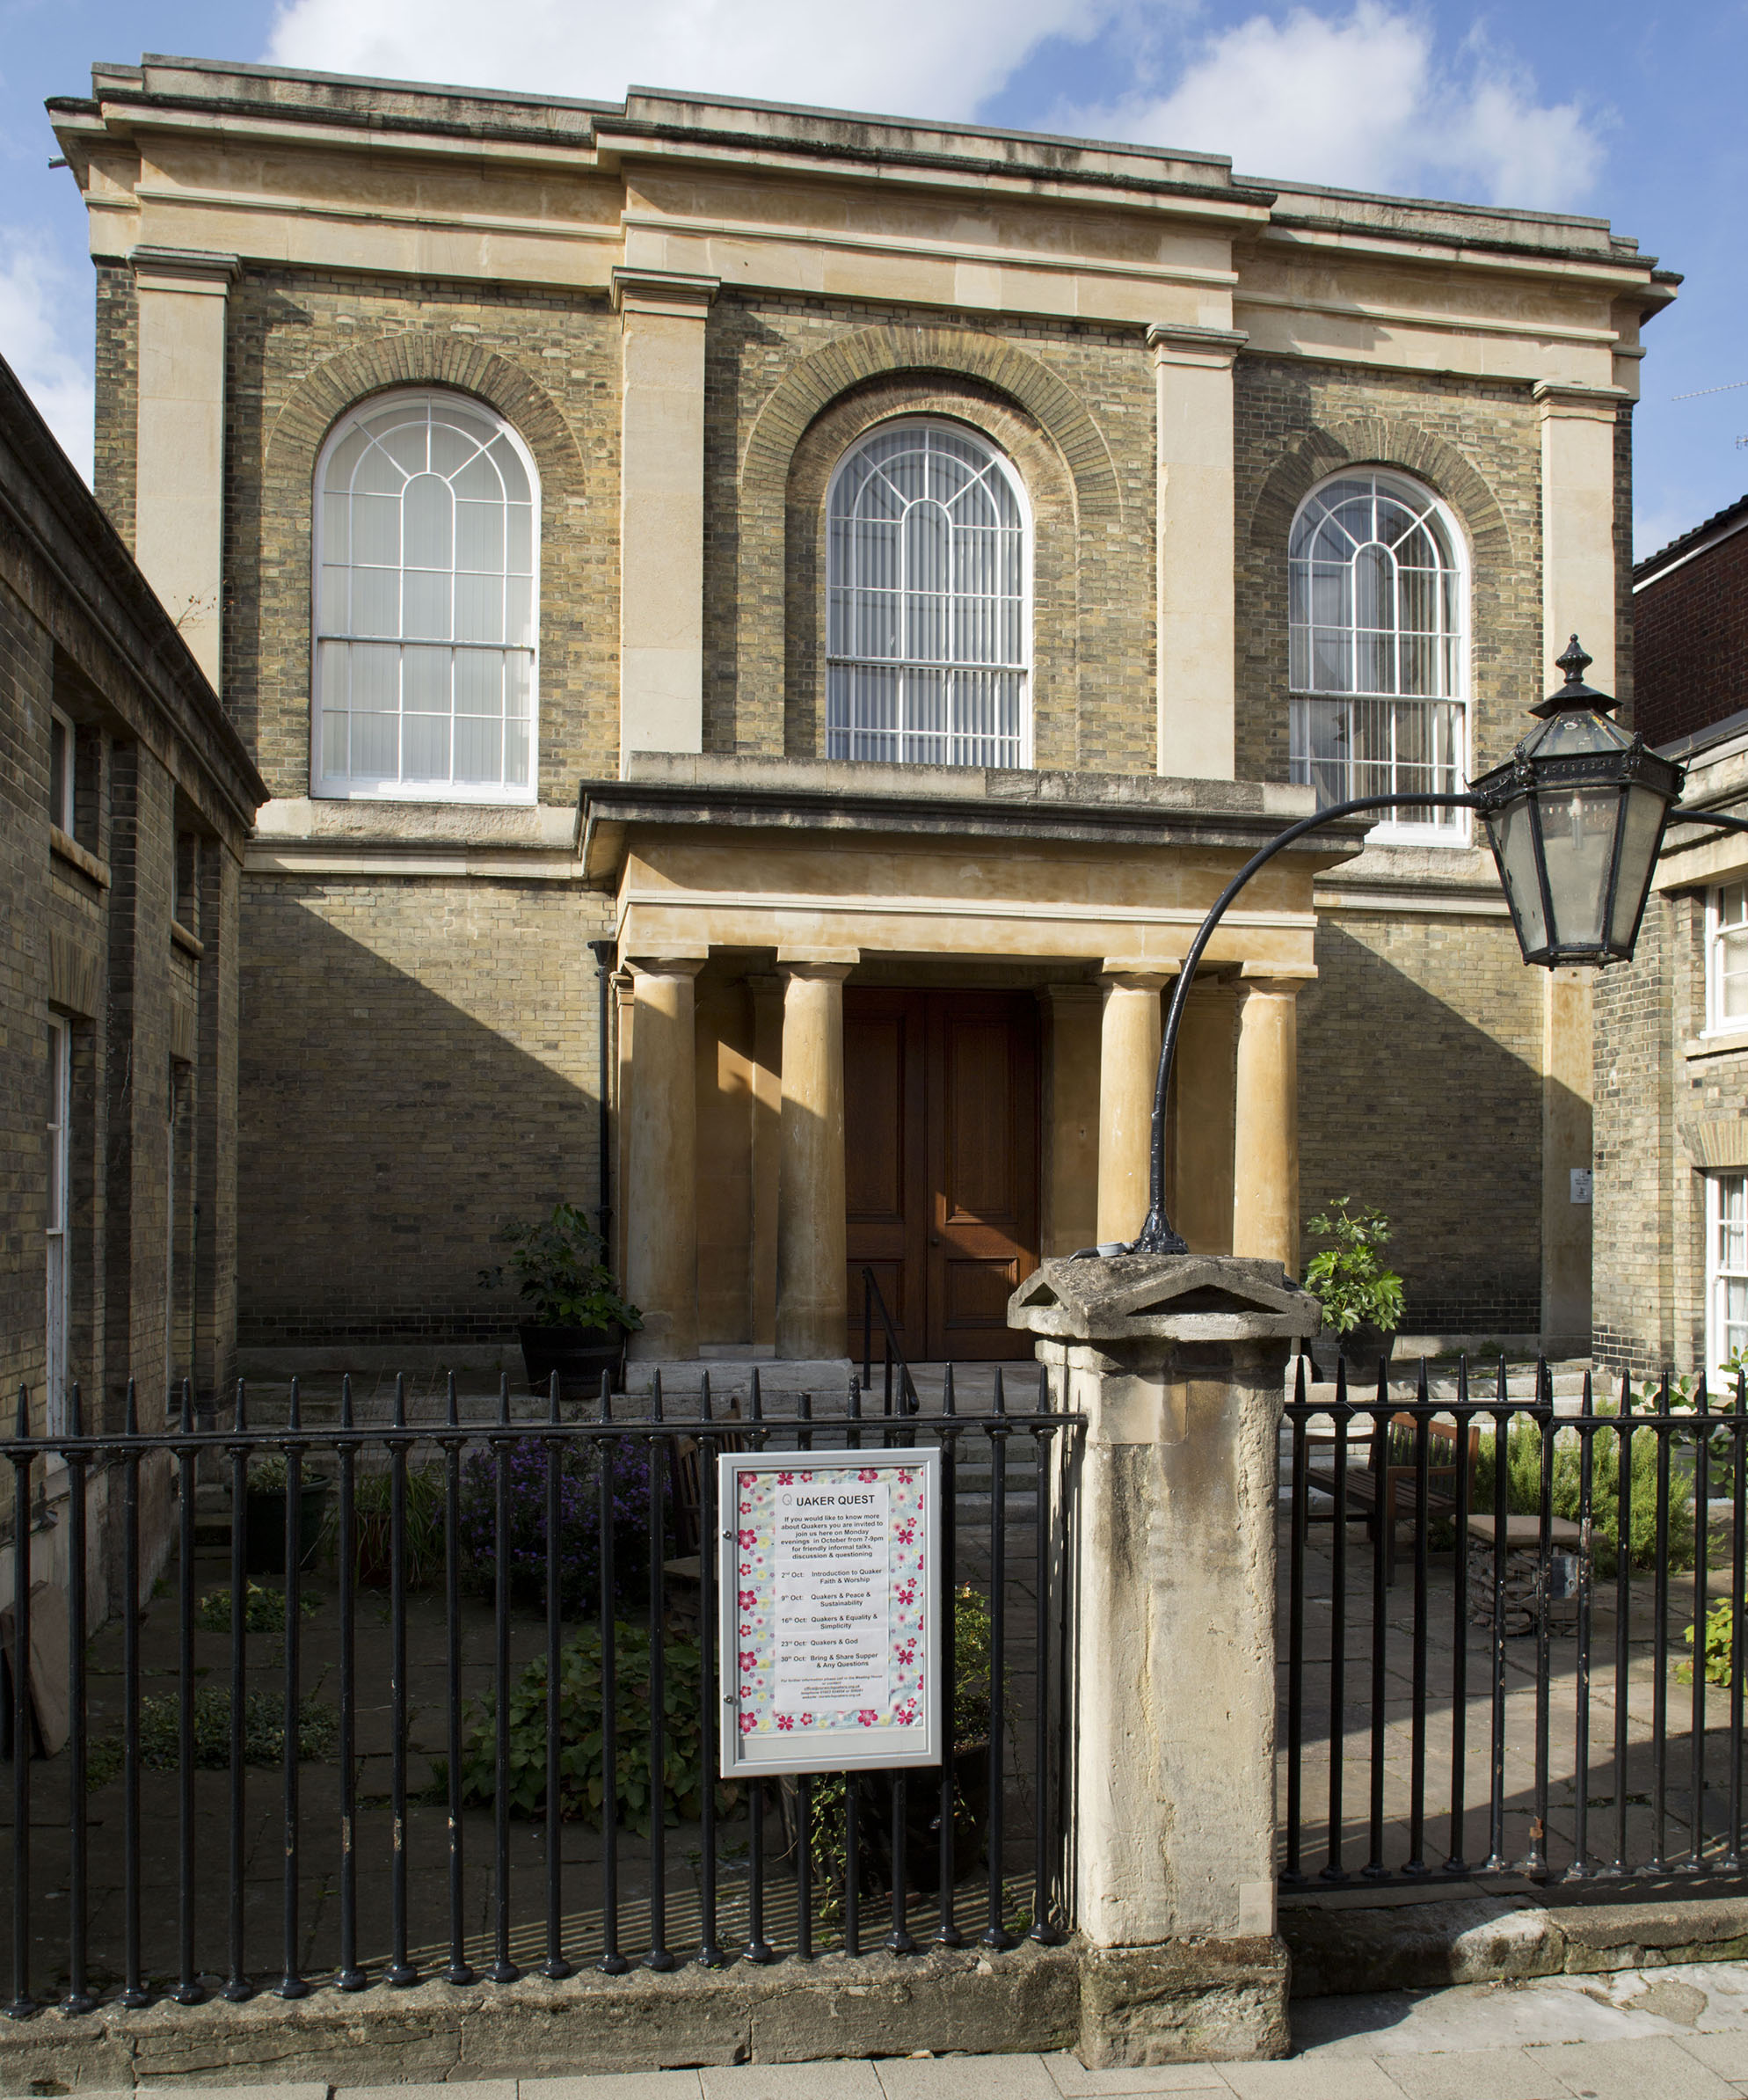 Exterior view of a Quaker Meeting House in Norwich